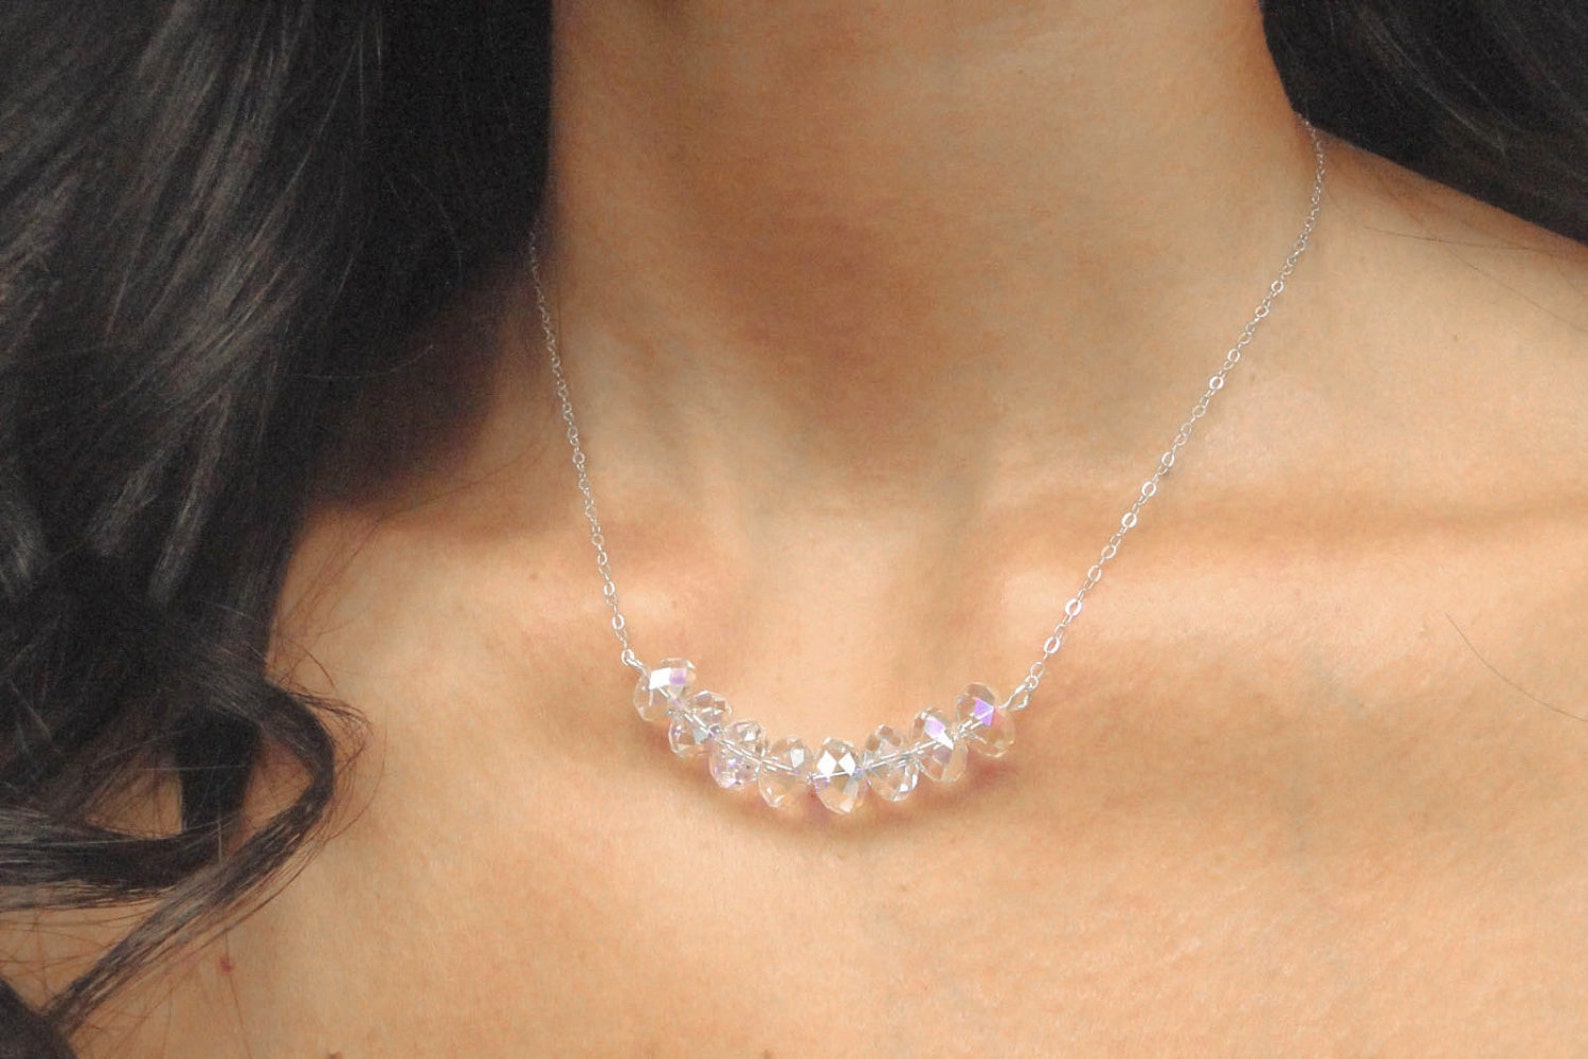 Crystal Bead Necklace Swarovski Crystal Necklace Carrie image 0.